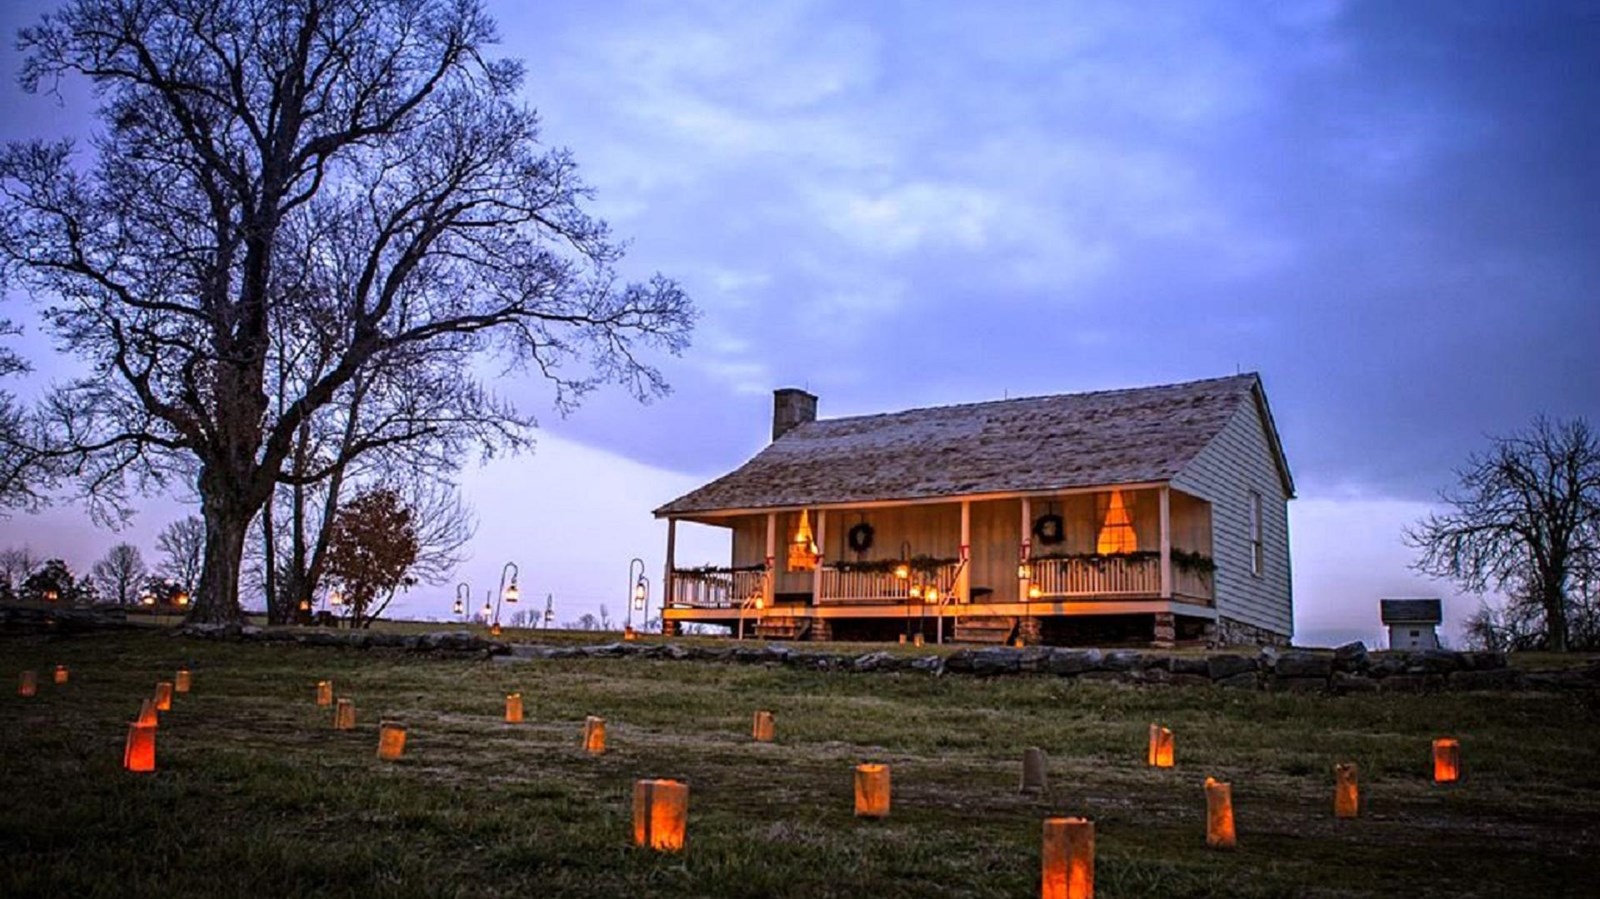 An old house glows in lantern light at dusk with luminaries lit by candles on grassy area out front